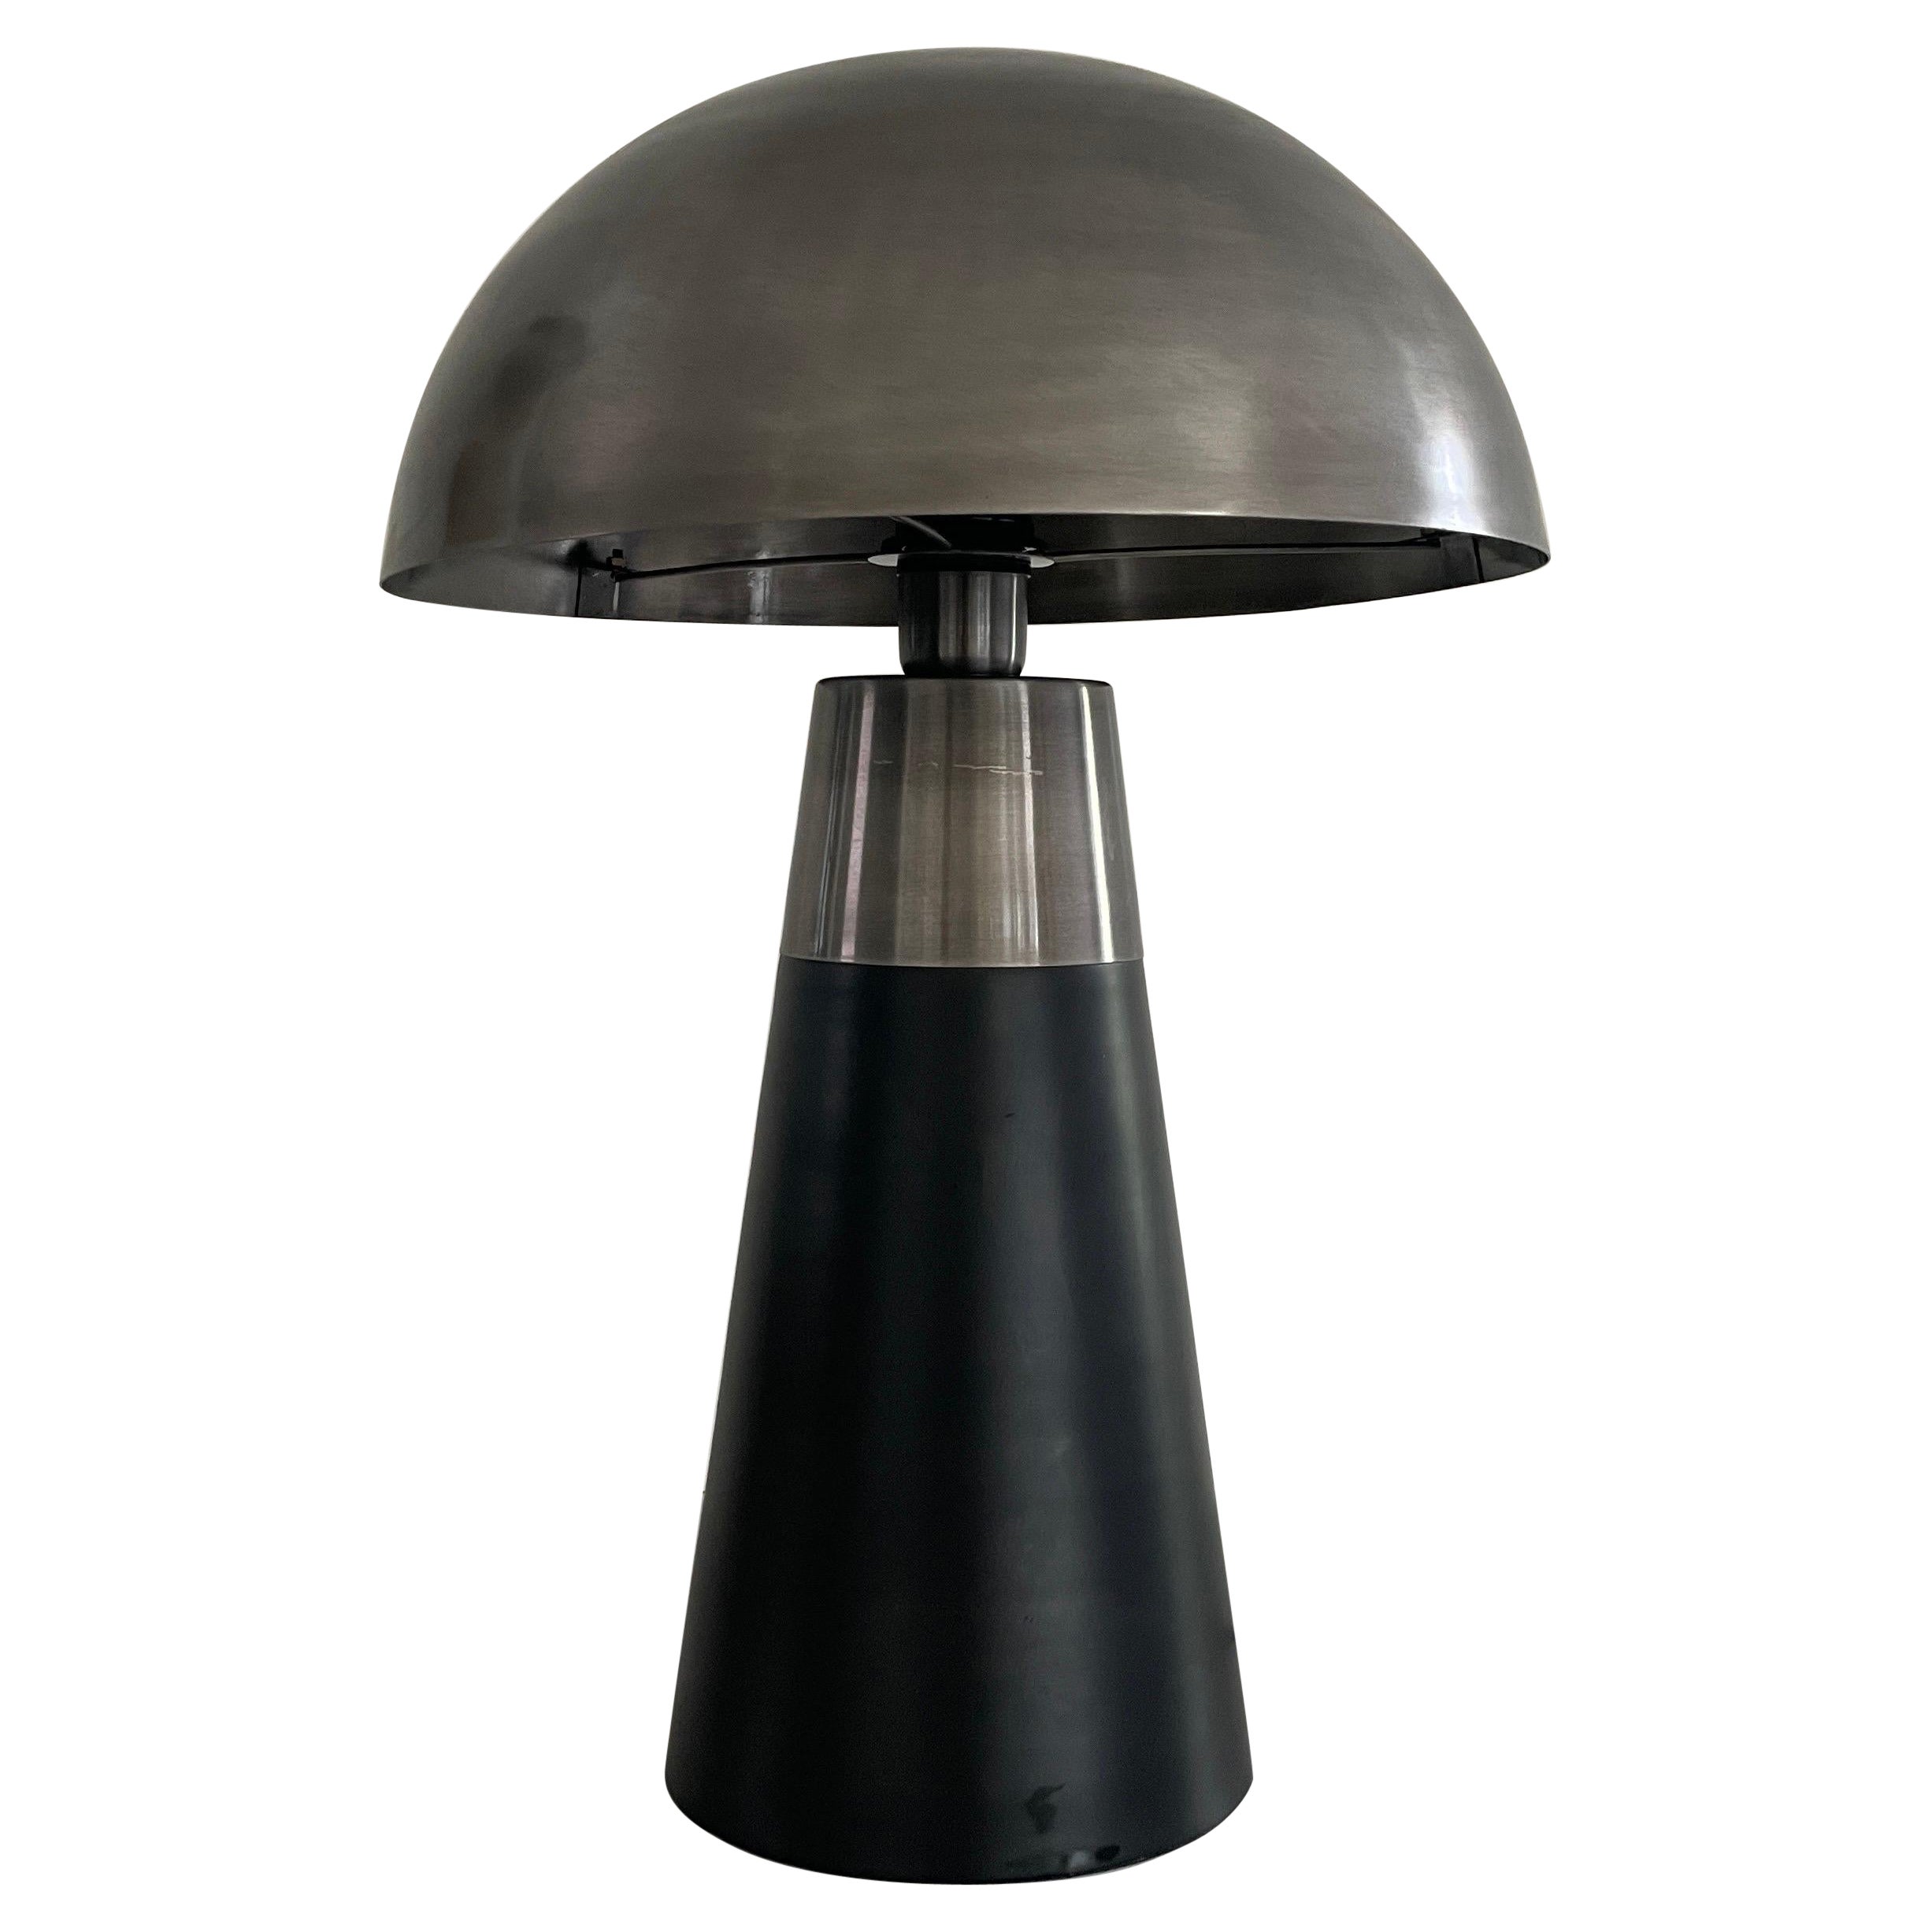 Muschroom and Conic Design Large Table Lamp by LAMBERT, 1980s, Germany For Sale